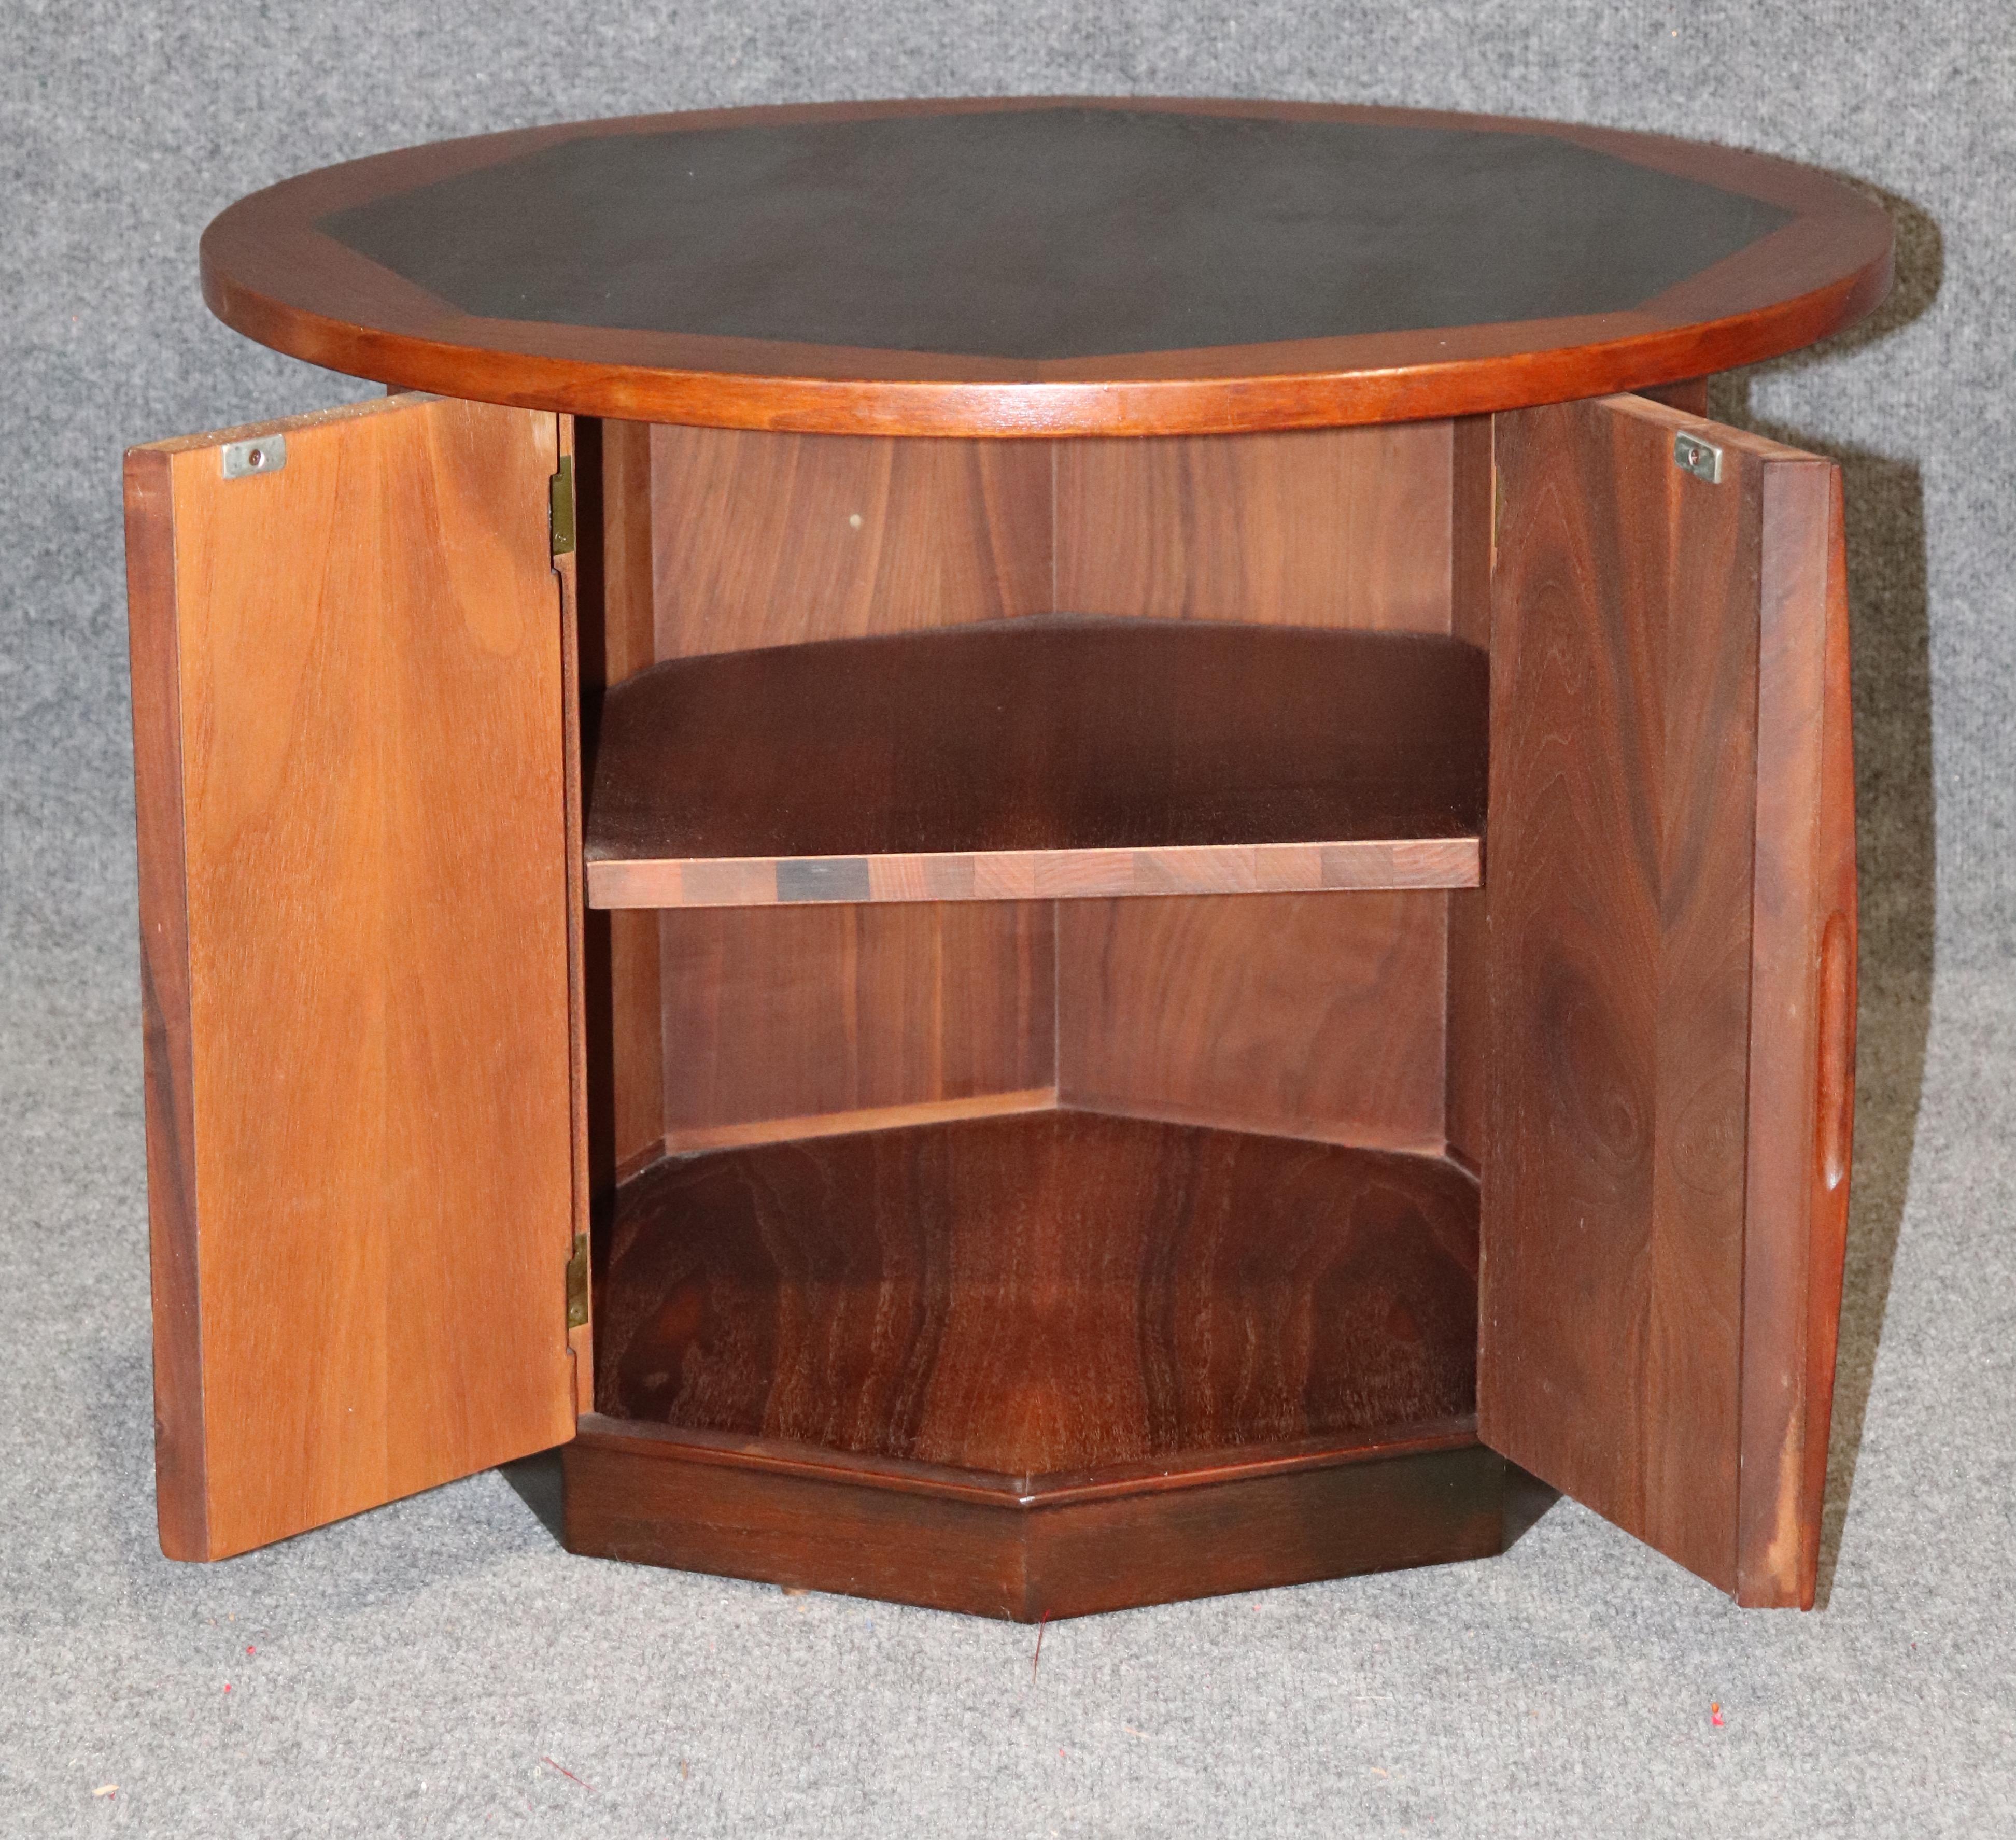 Mid-century made side table with beautiful rosewood inlay. Drum style pedestal table with cabinet storage and octagonal shape inset.
Please confirm location.